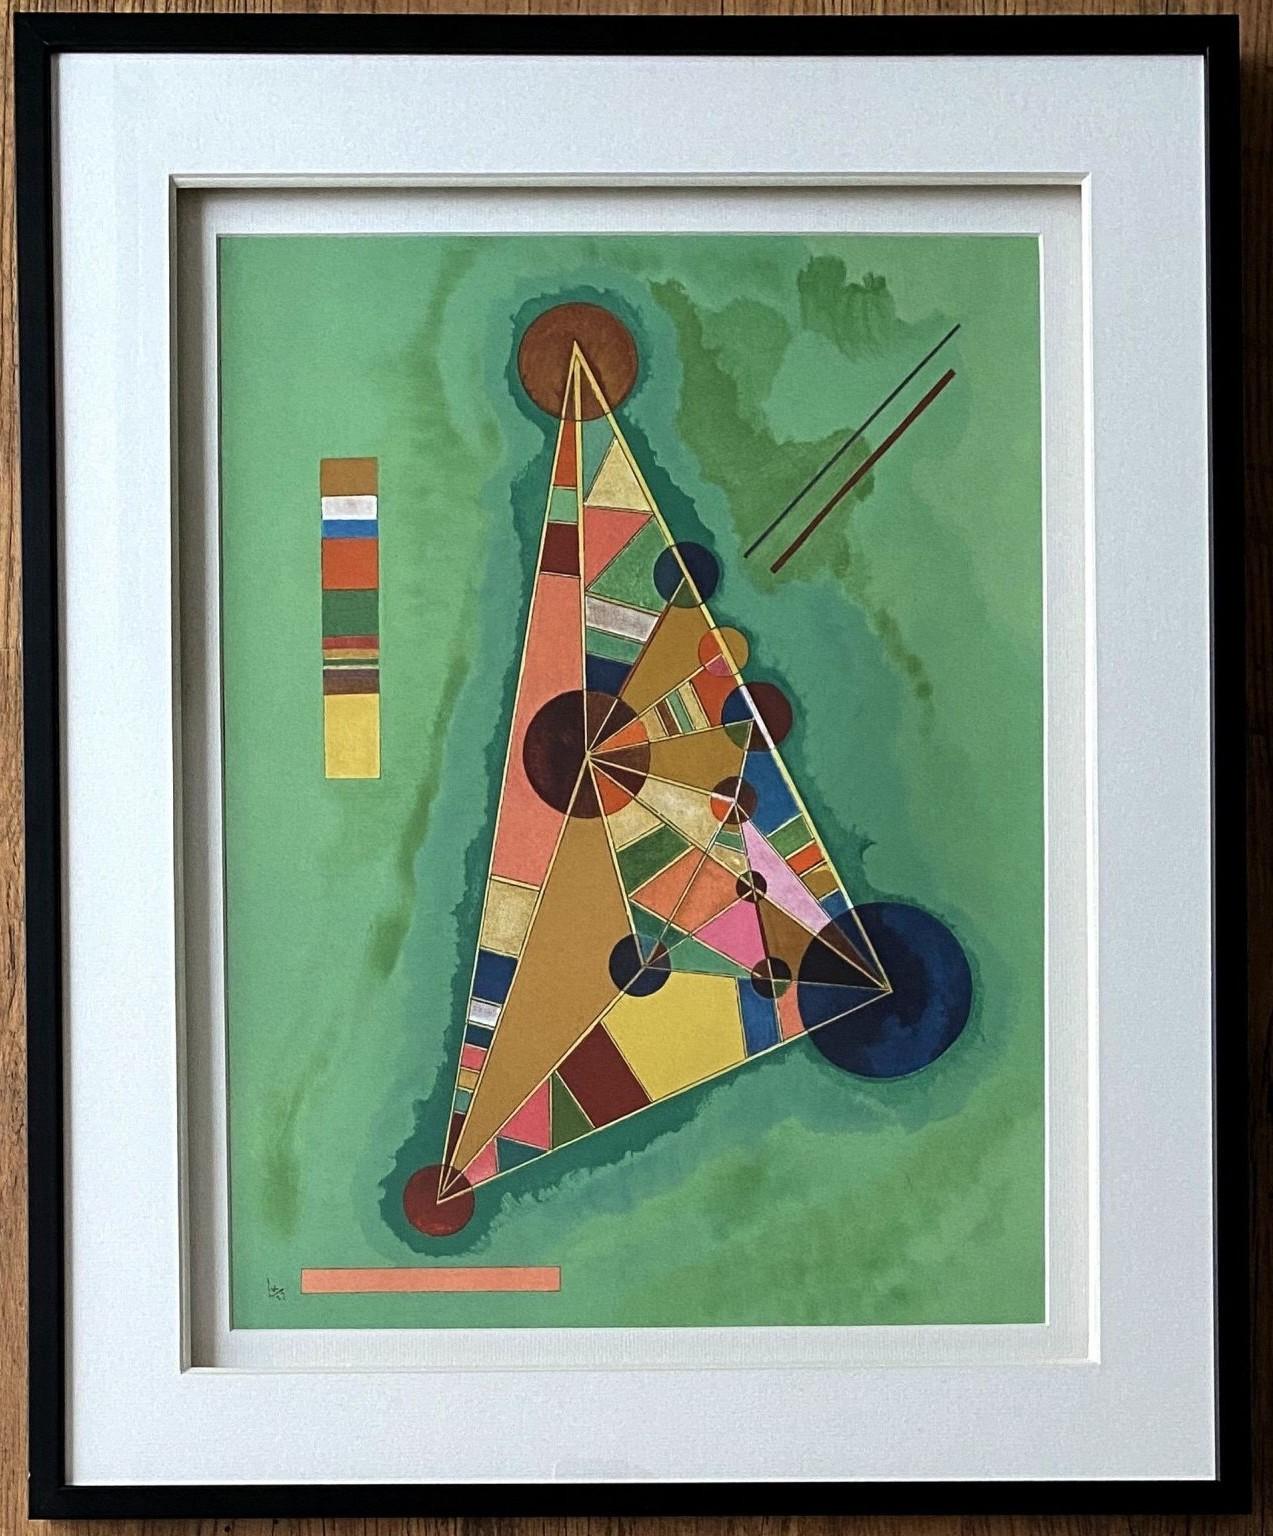 (after) Wassily Kandinsky Interior Print - Composition - Lithograph Signed in the Plate - Framed